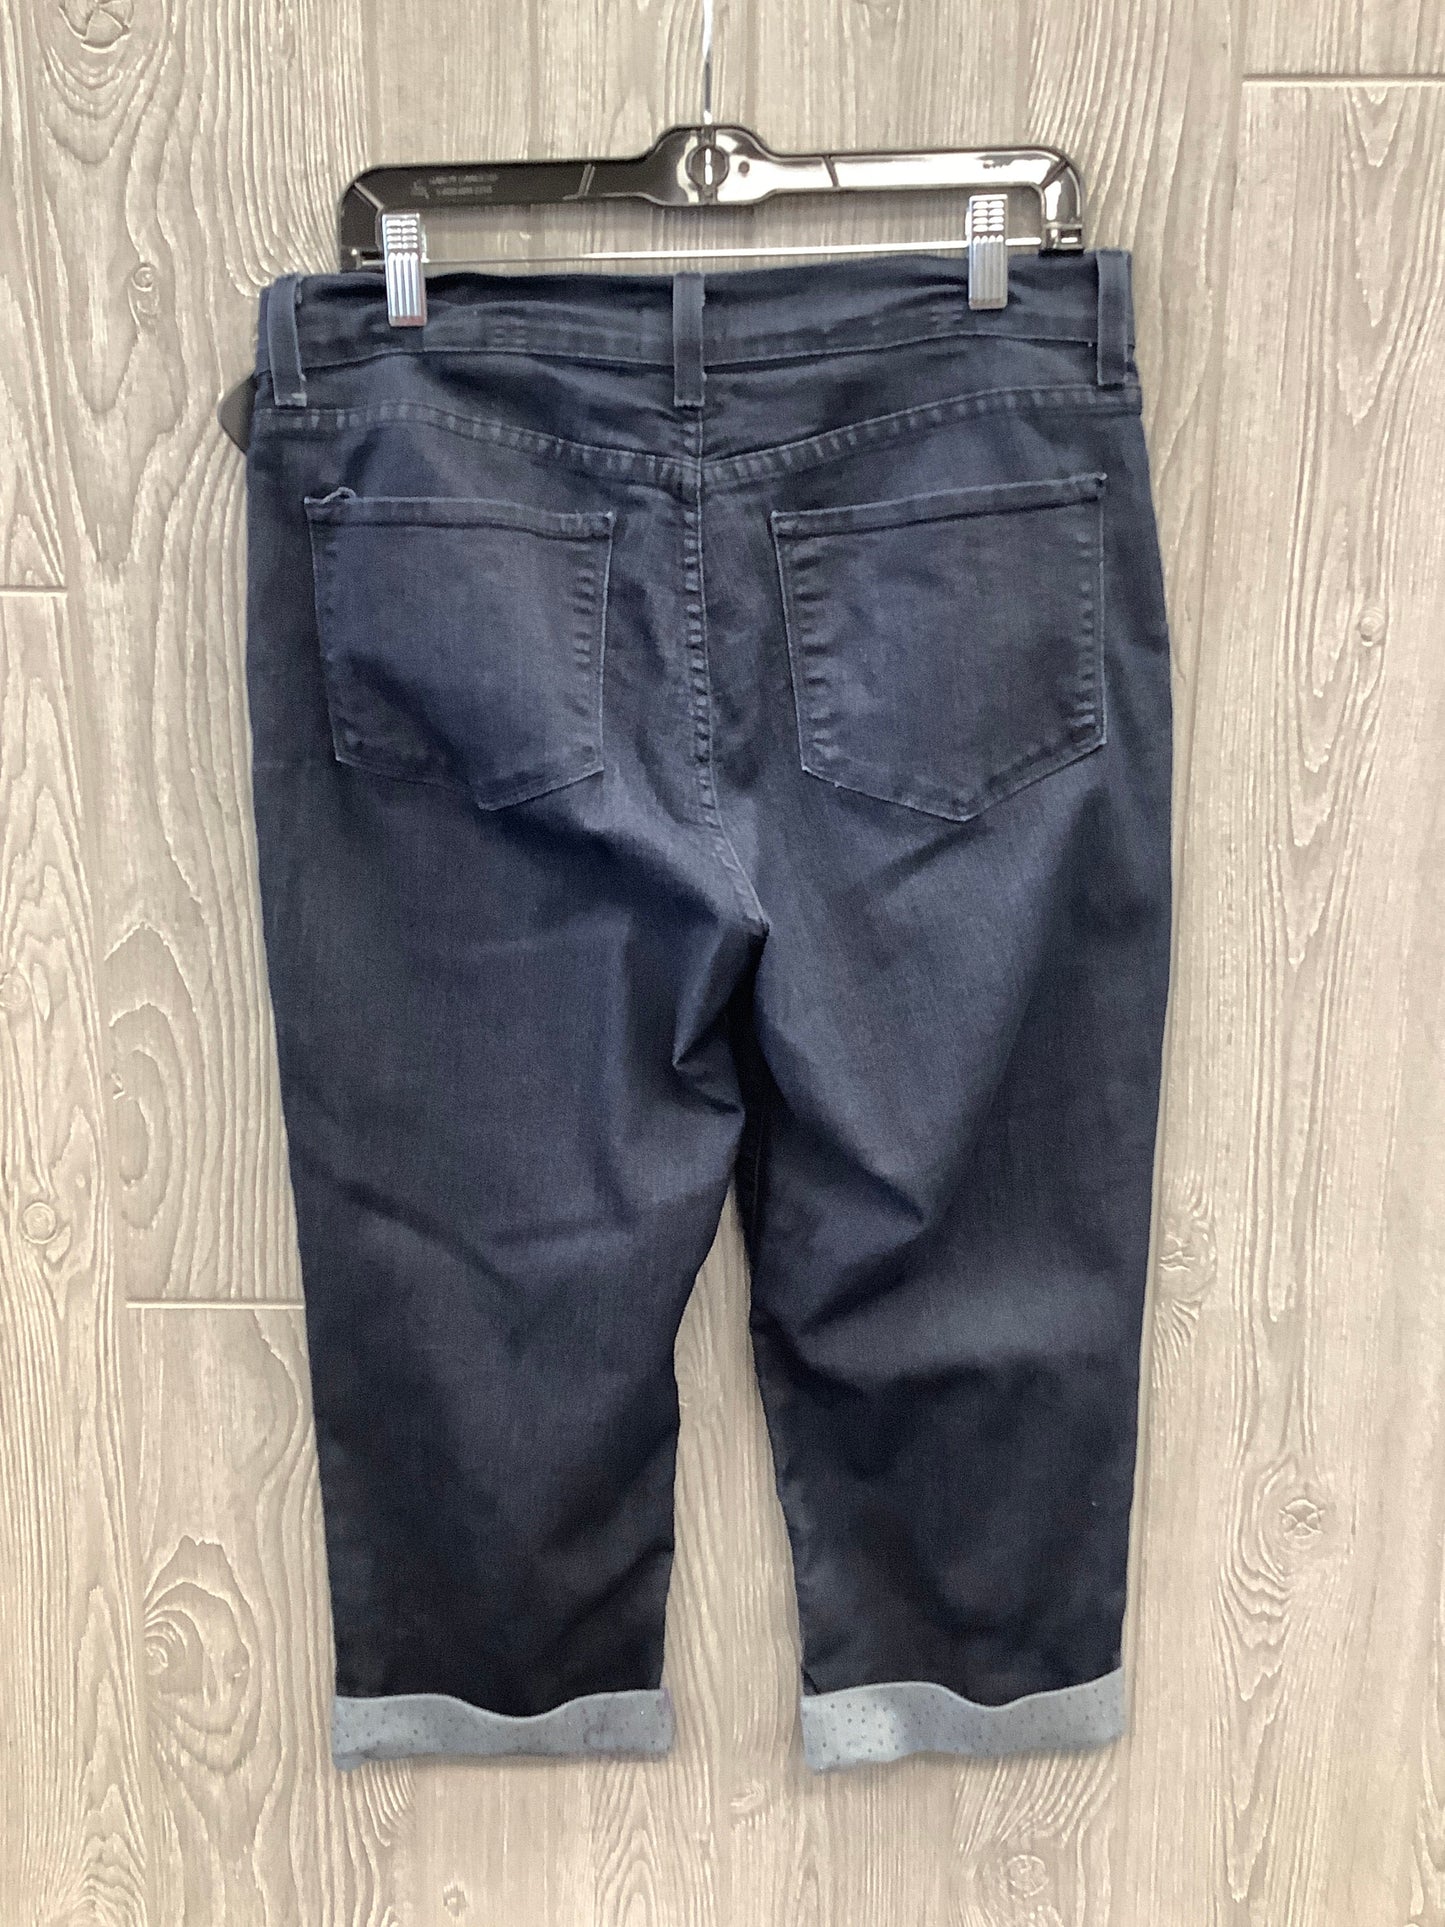 Capris By Not Your Daughters Jeans  Size: 12